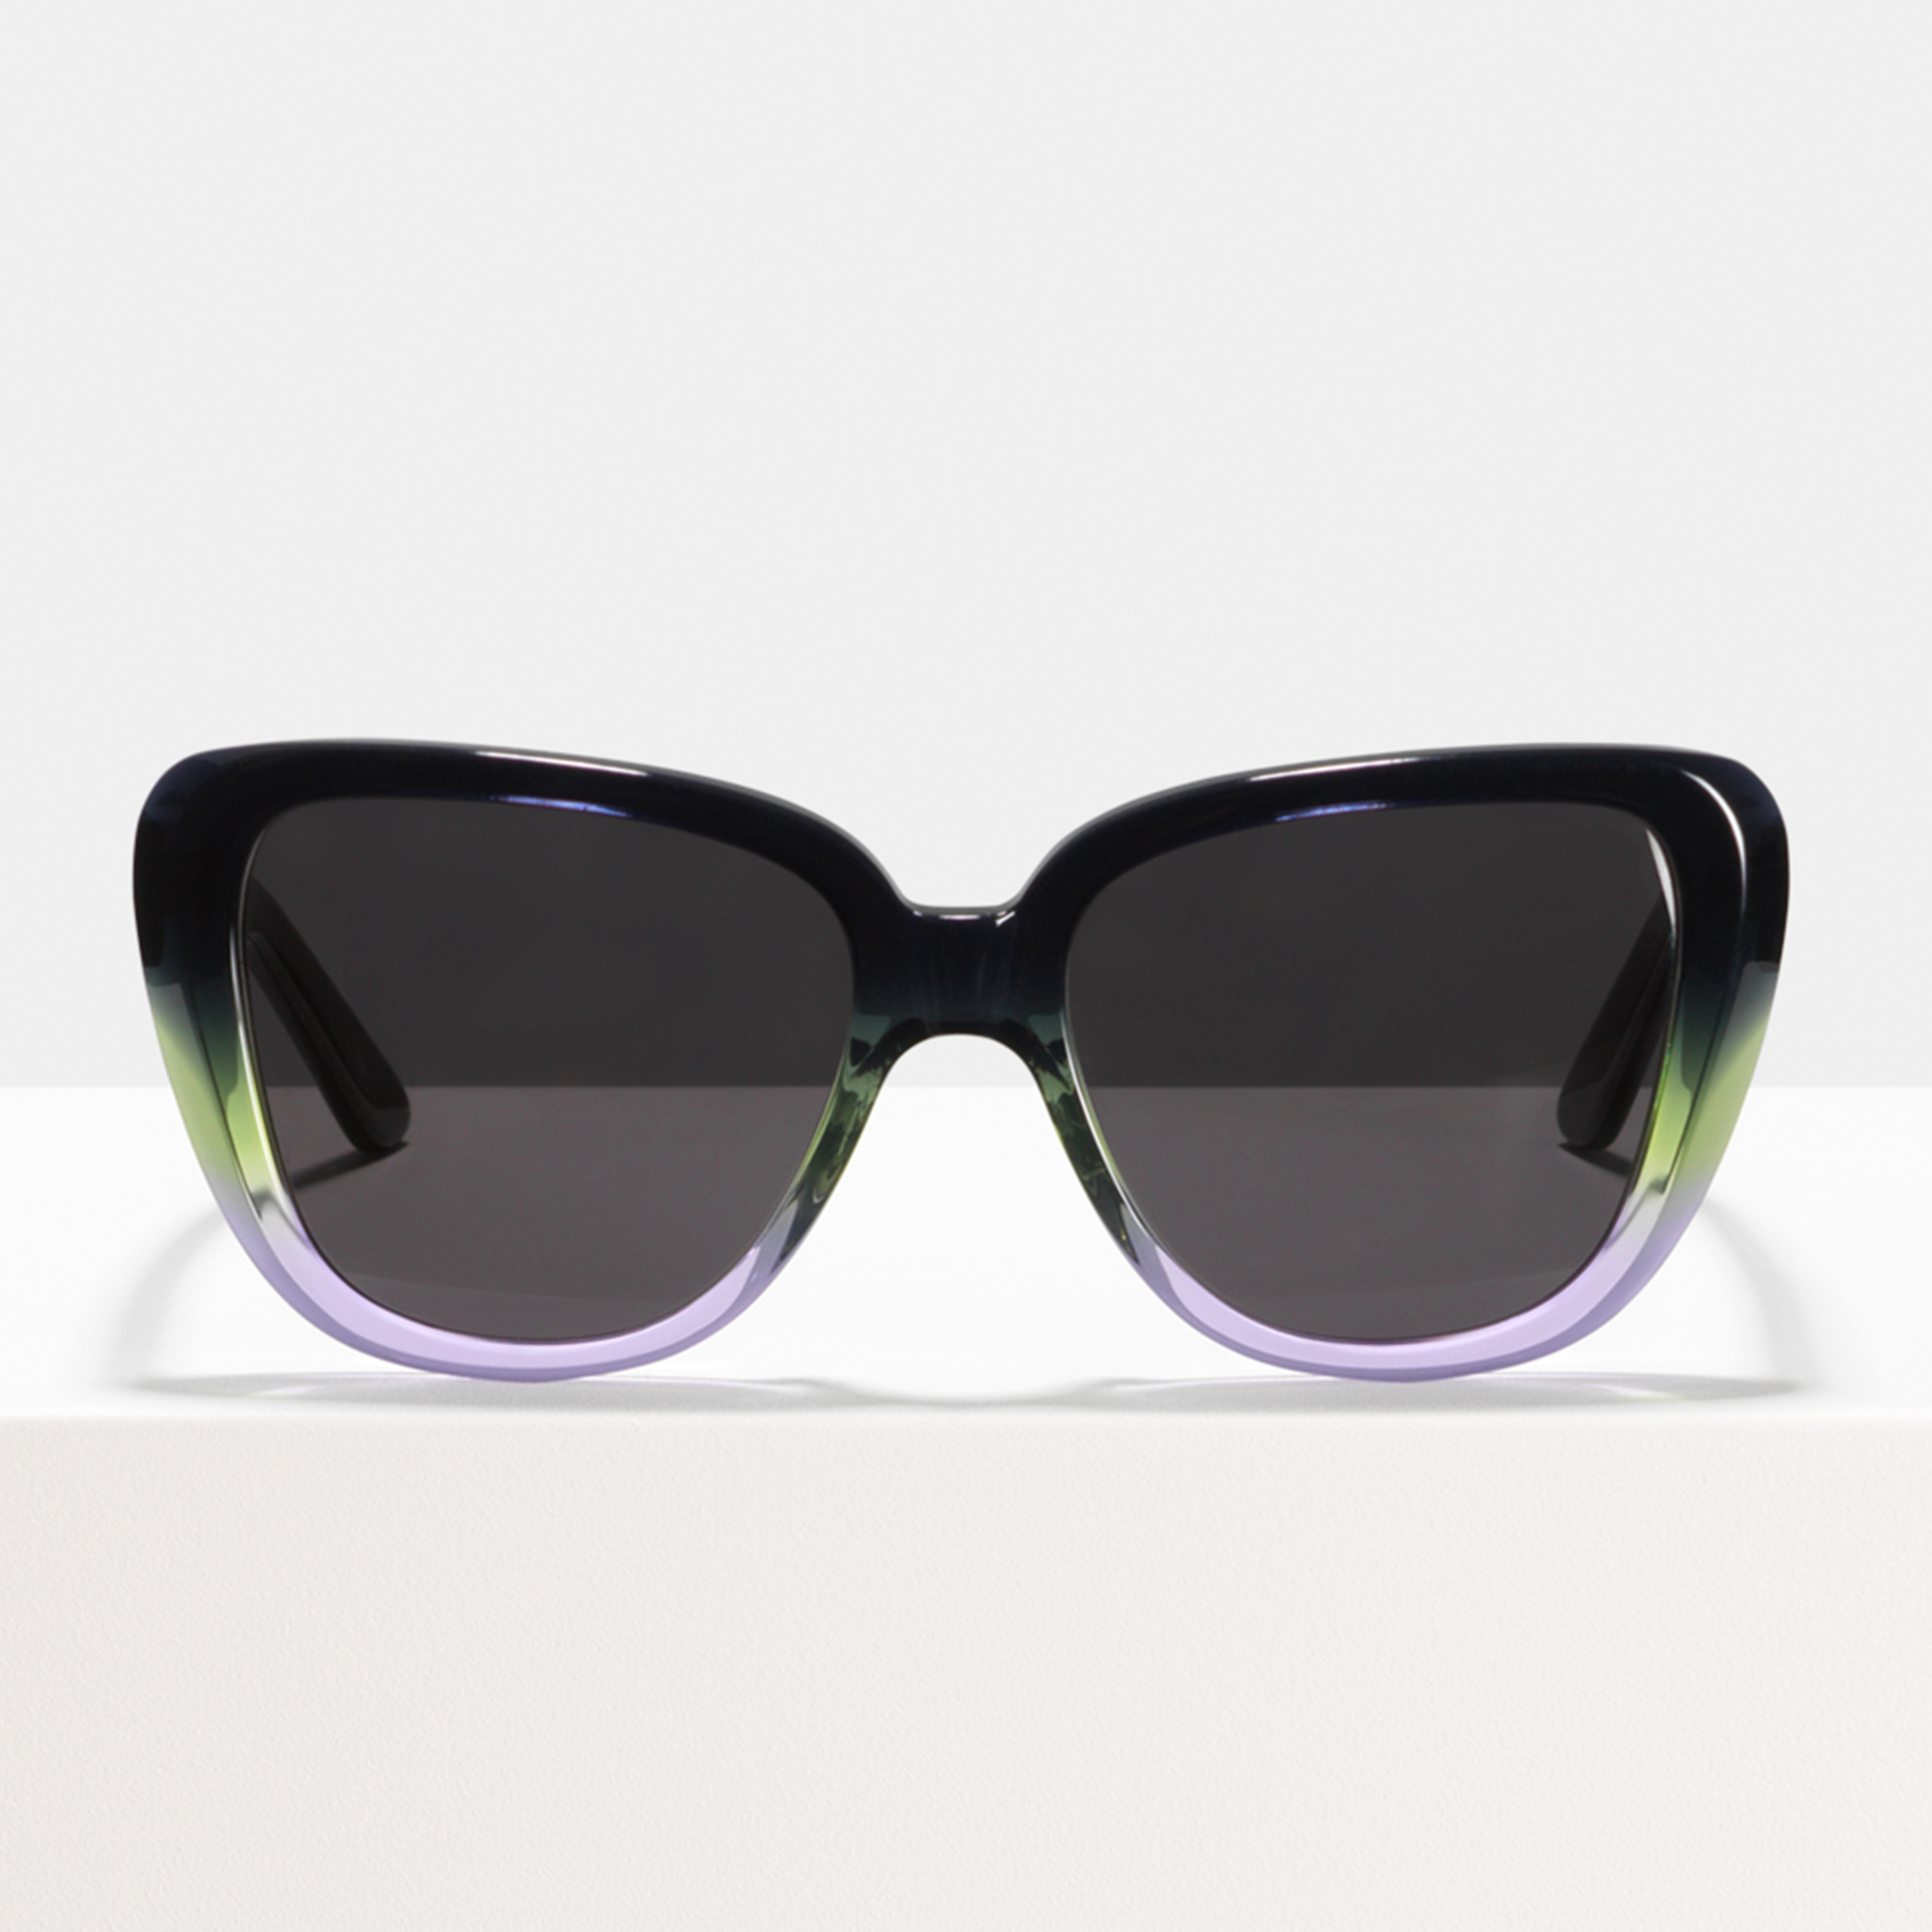 Ace & Tate Solaires |  Acétate in Marron, Vert, Violet